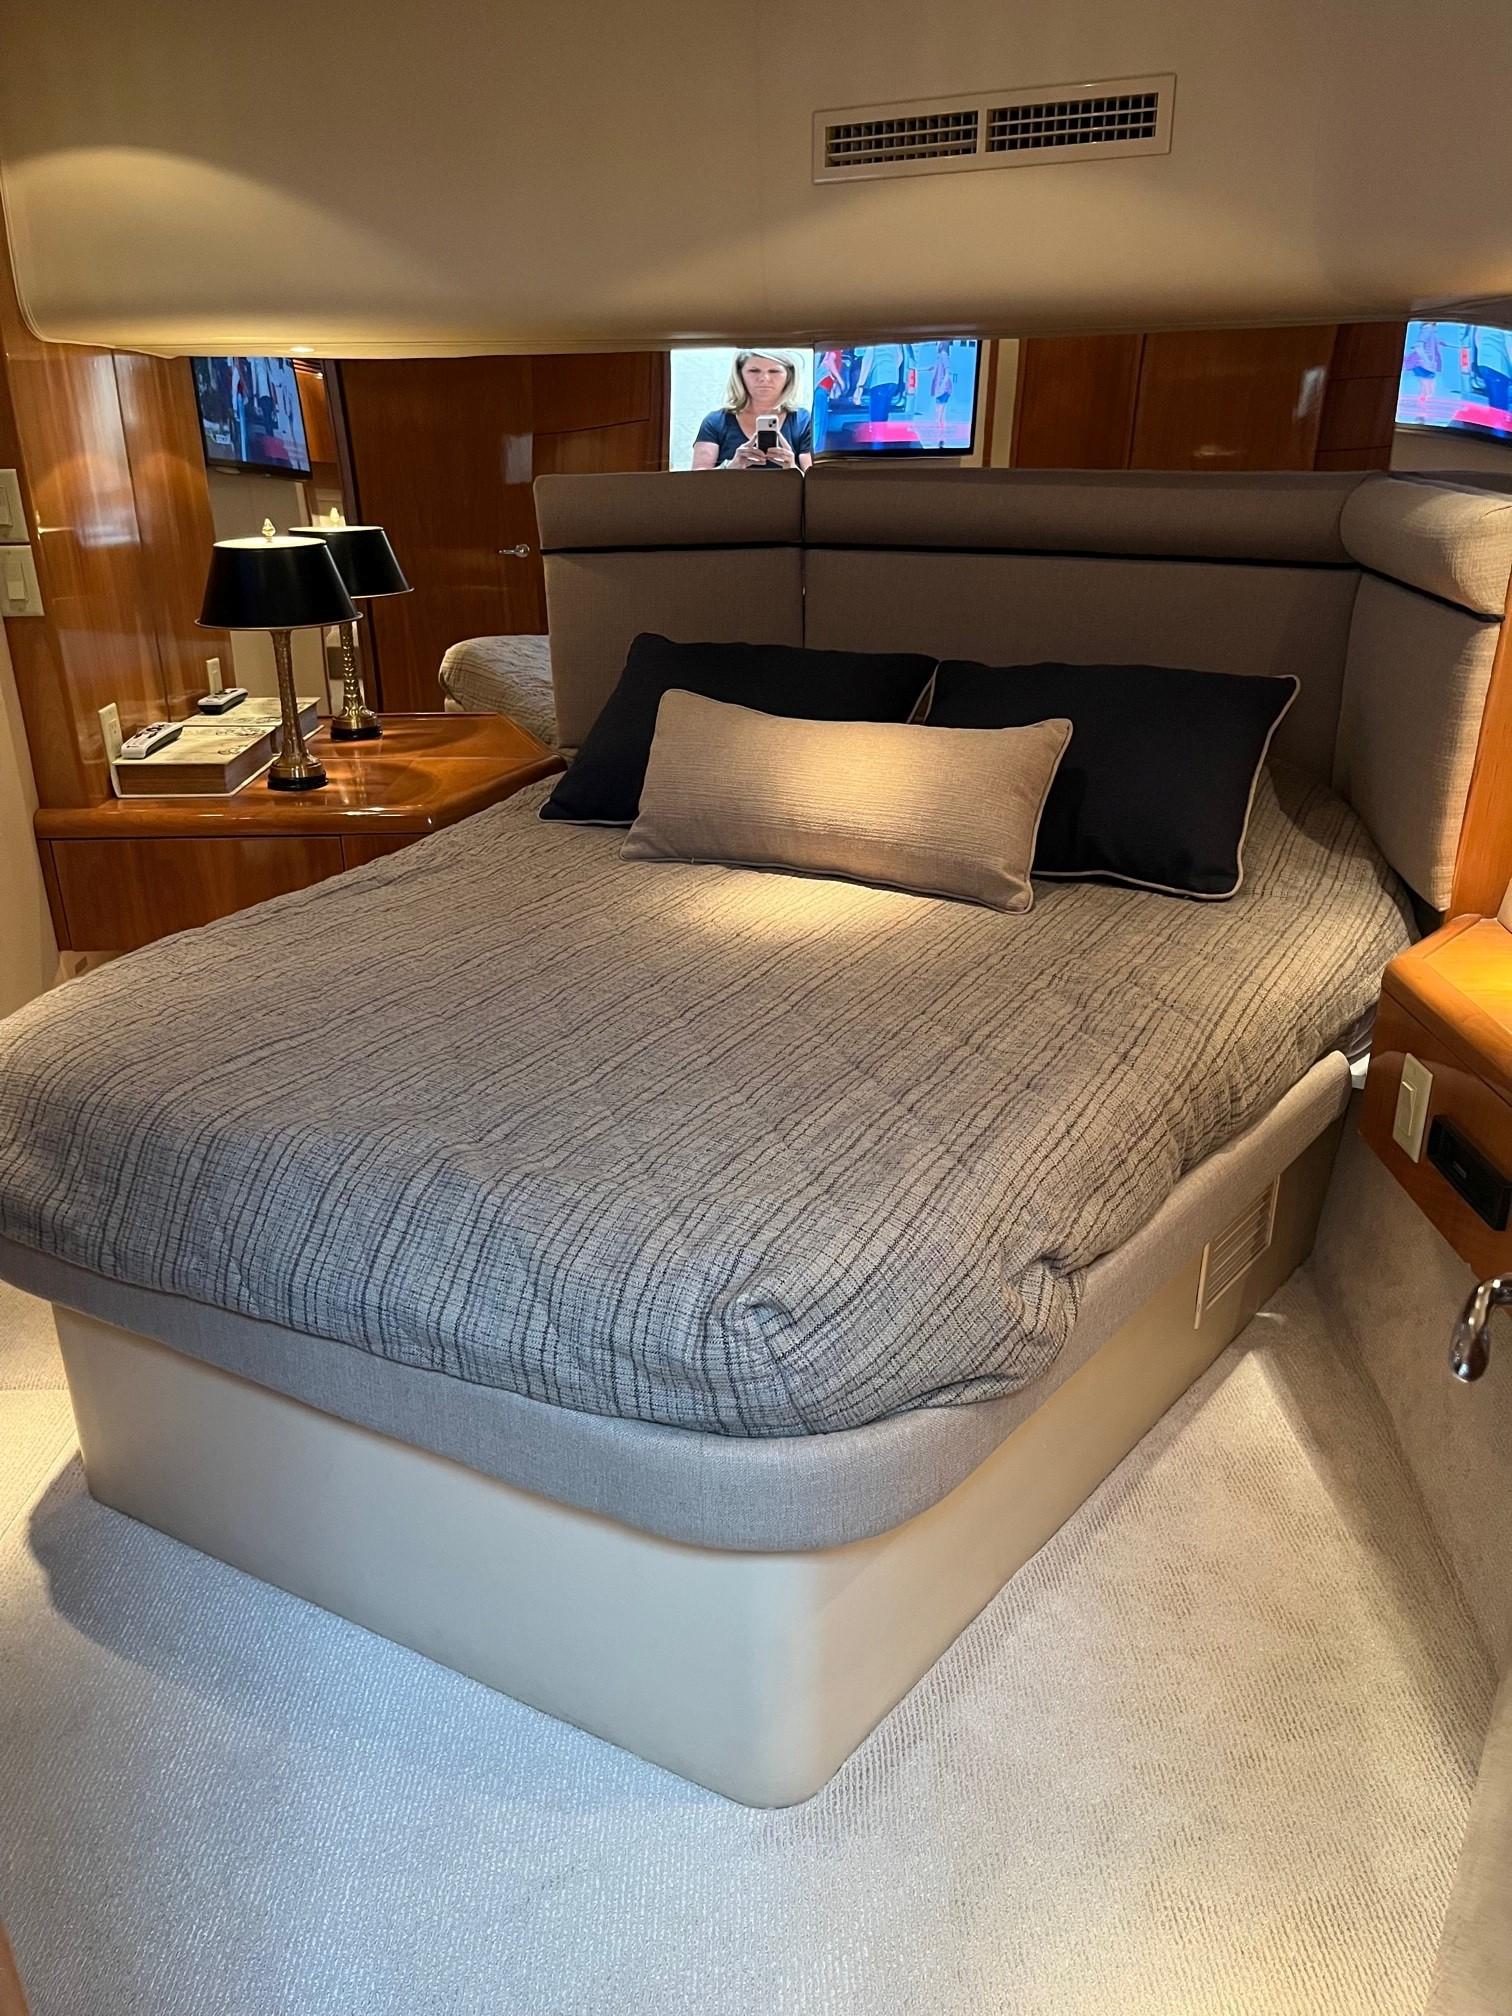 VIP Stateroom and Nightstand